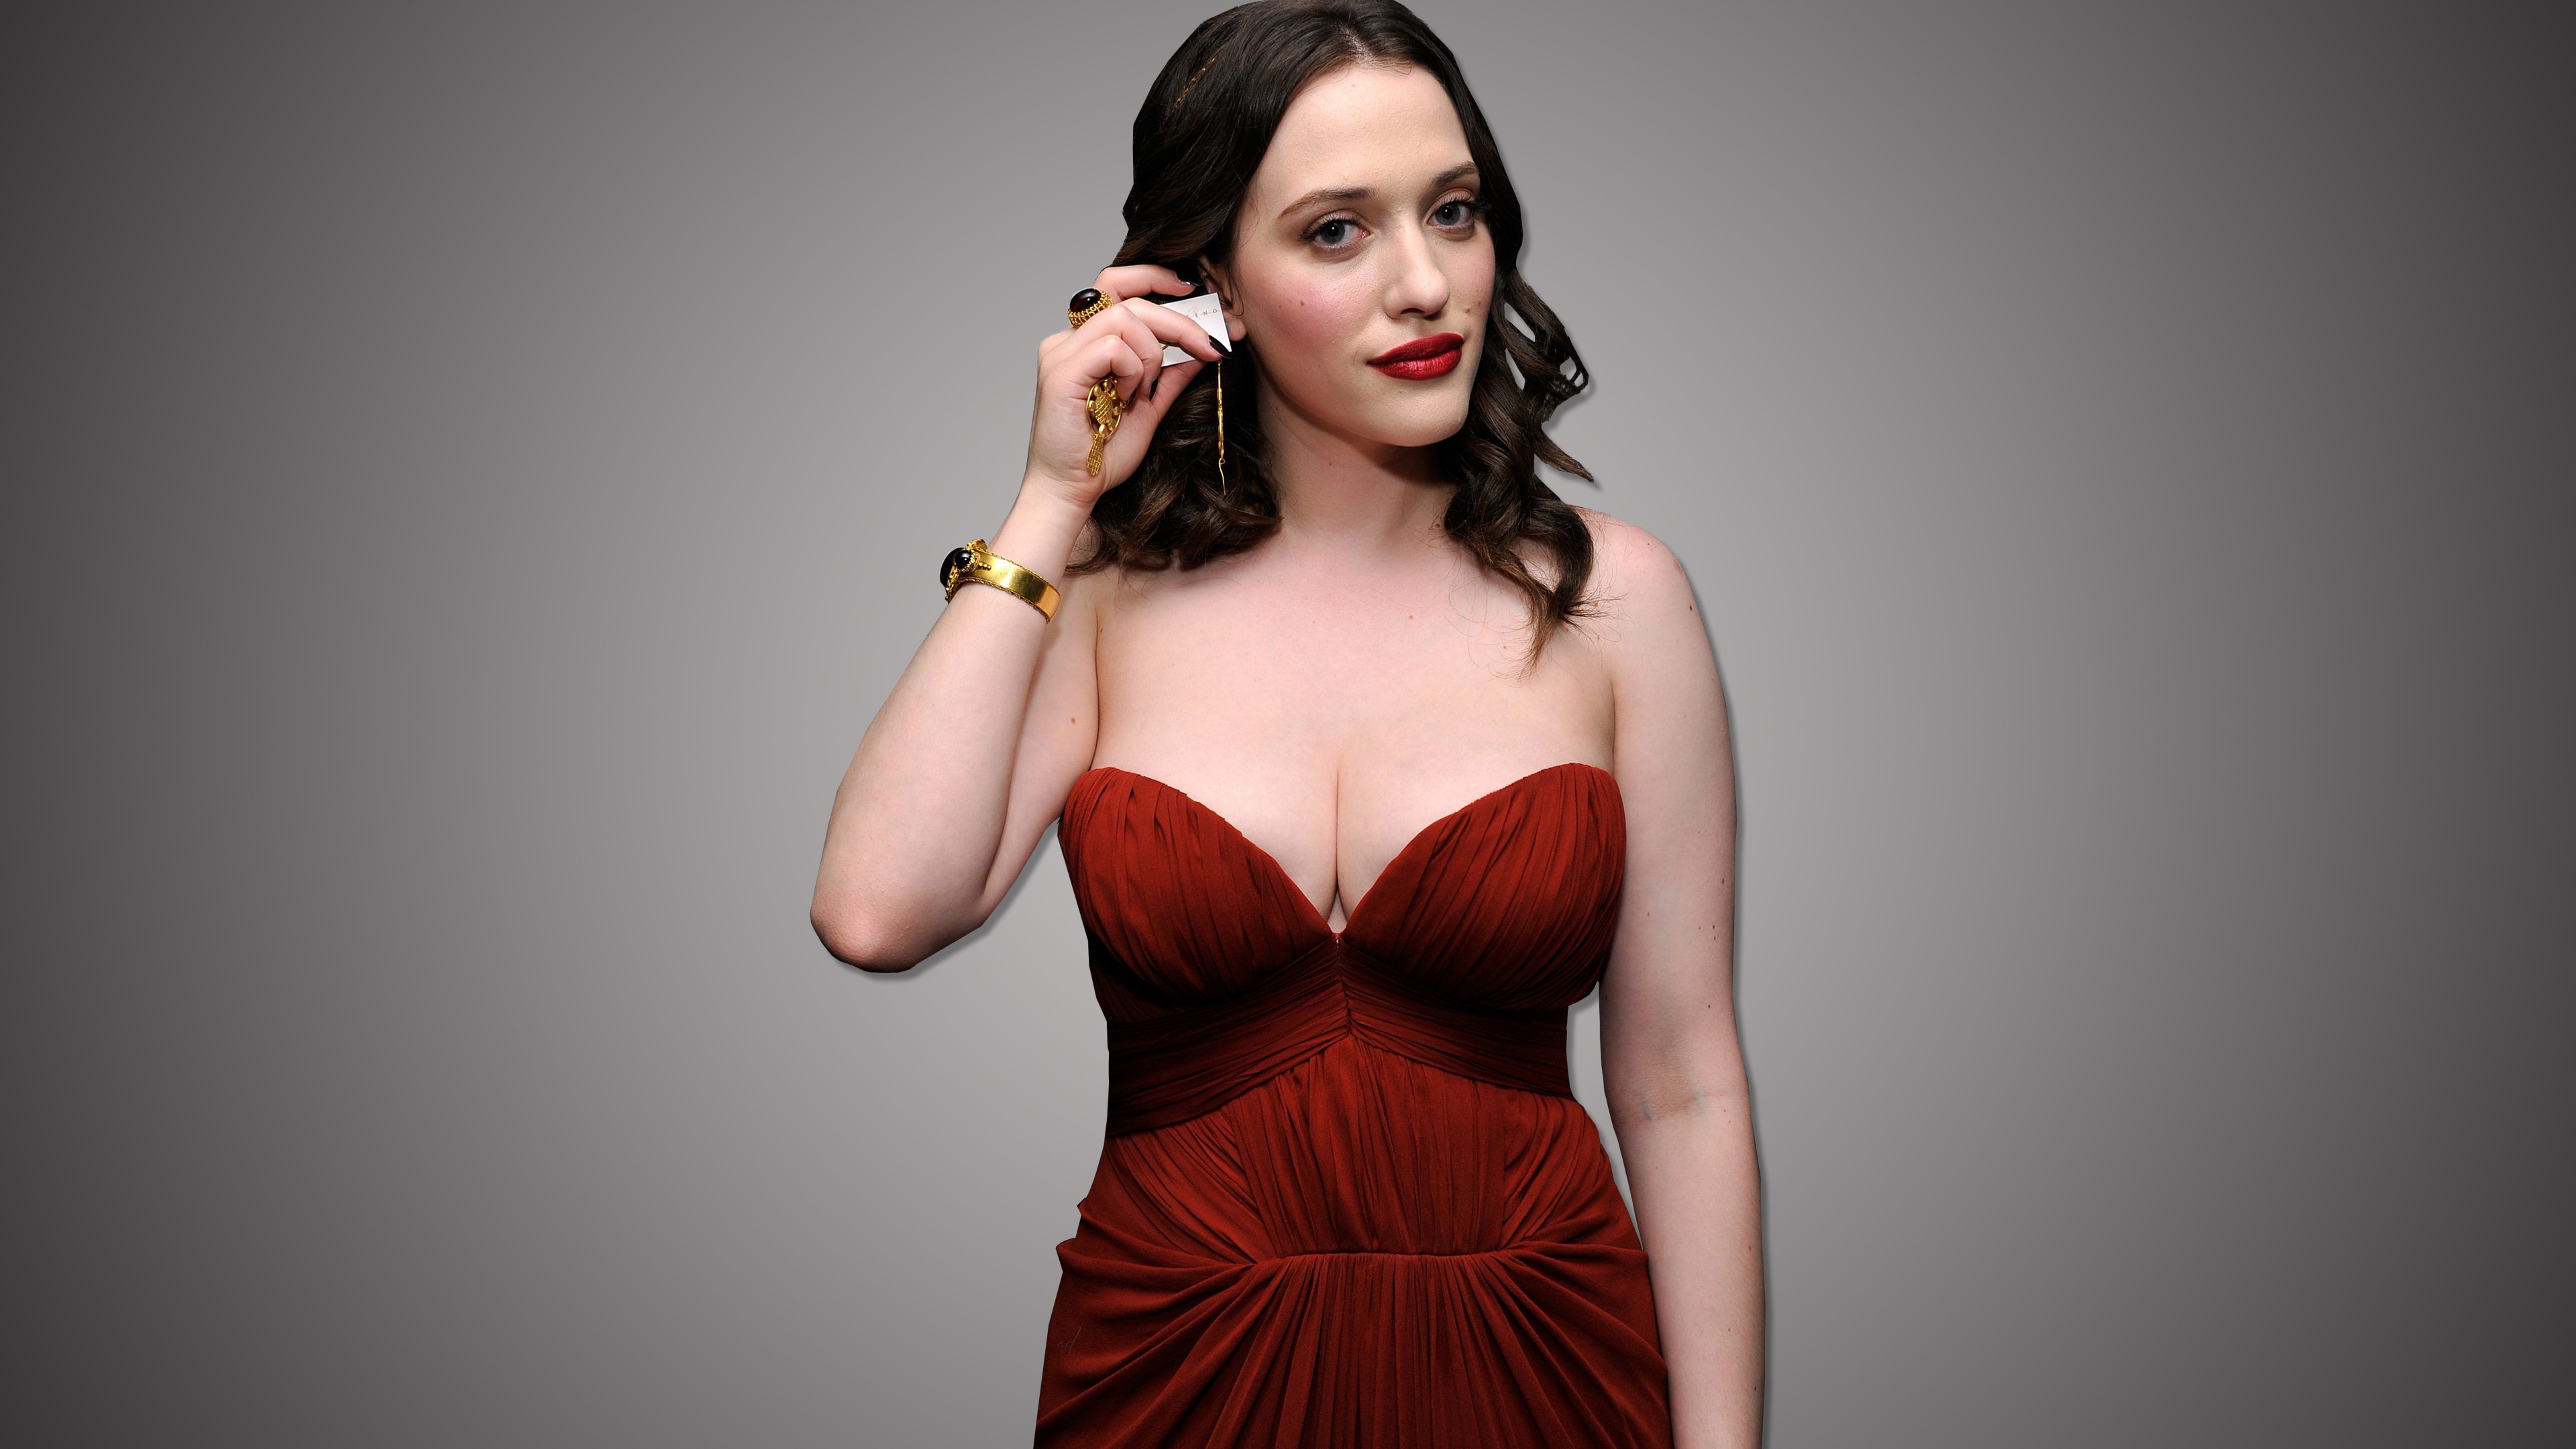 People 3840x2160 Kat Dennings actress brunette big boobs red dress gradient women strapless dress cleavage glamour